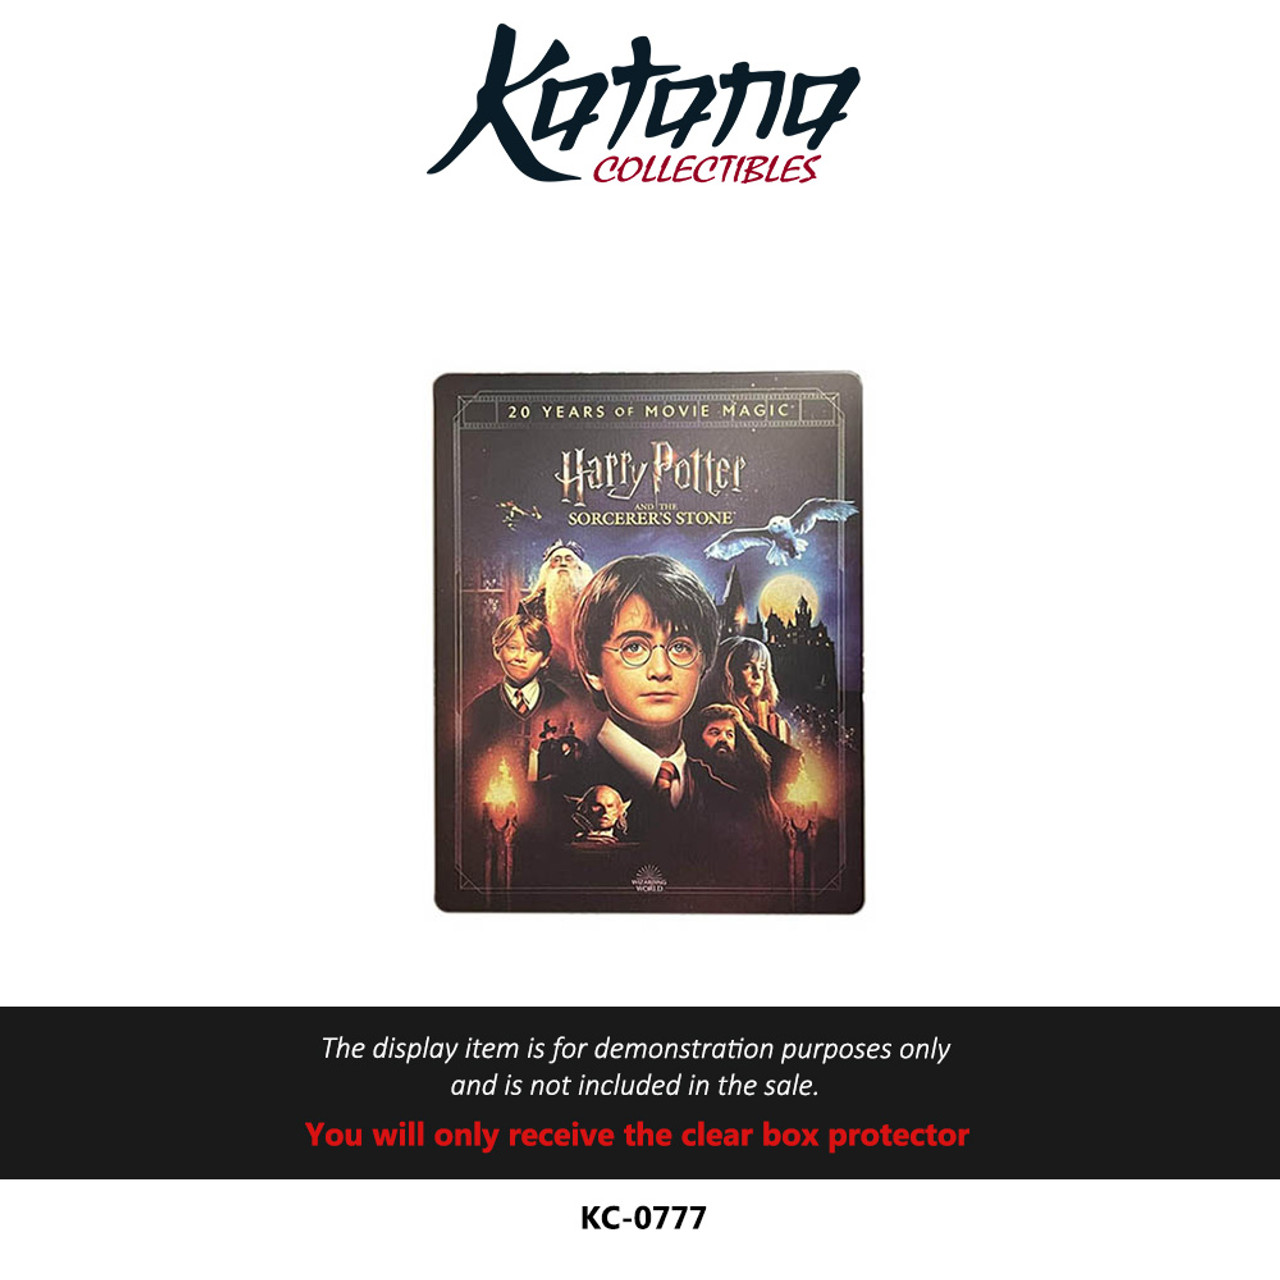 Katana Collectibles Protector For Harry Potter and the Sorcerer's Stone Steelbook